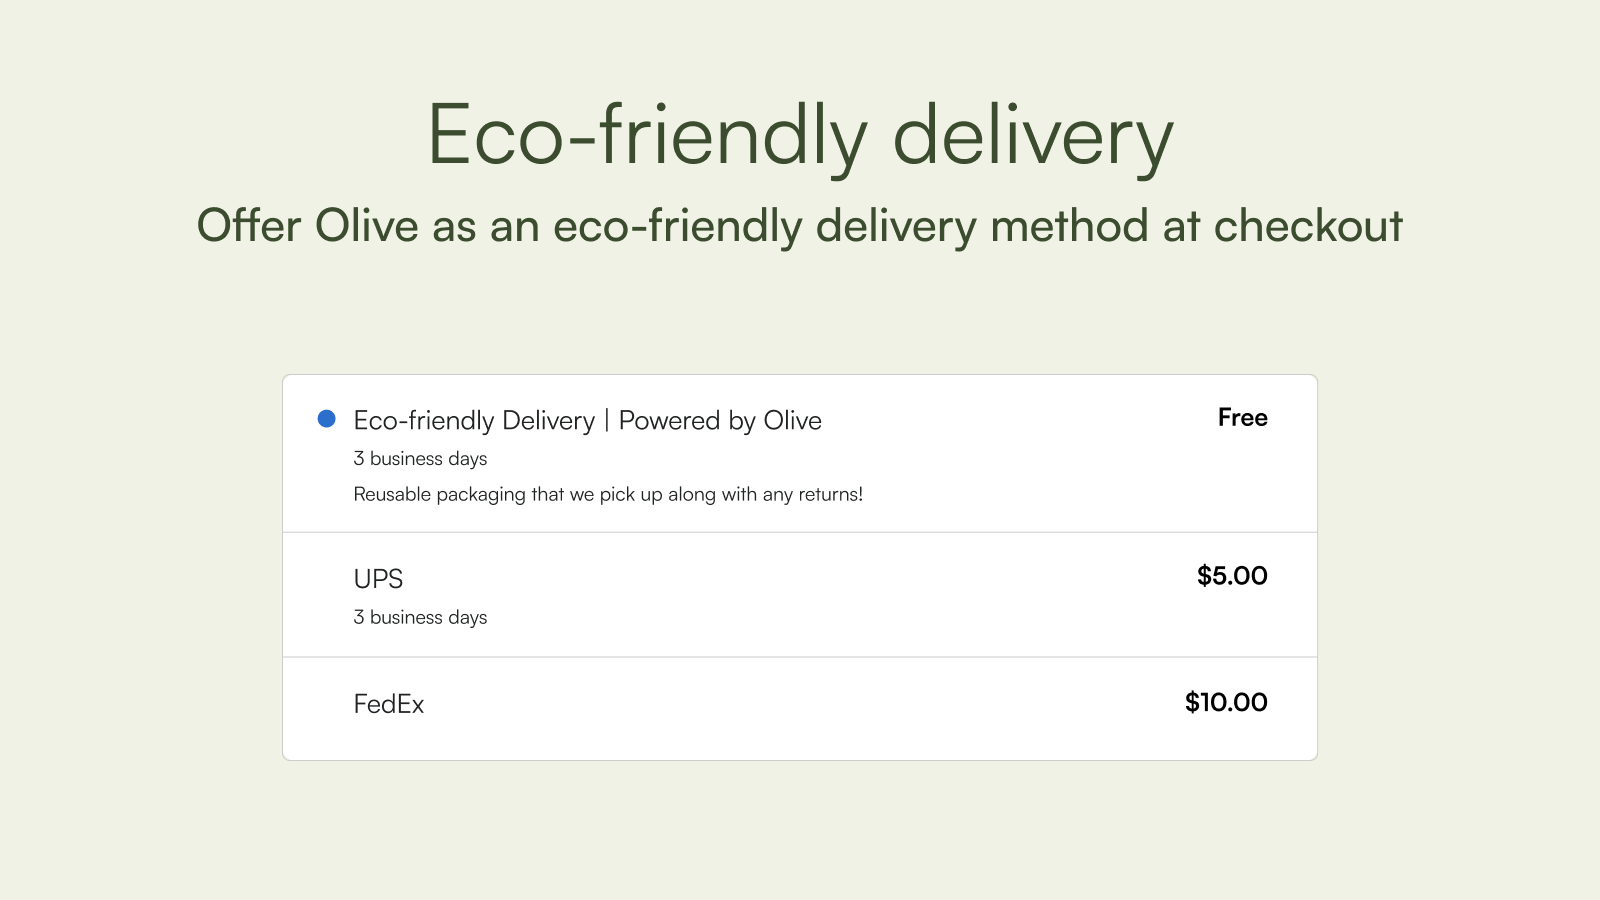 Eco-friendly delivery